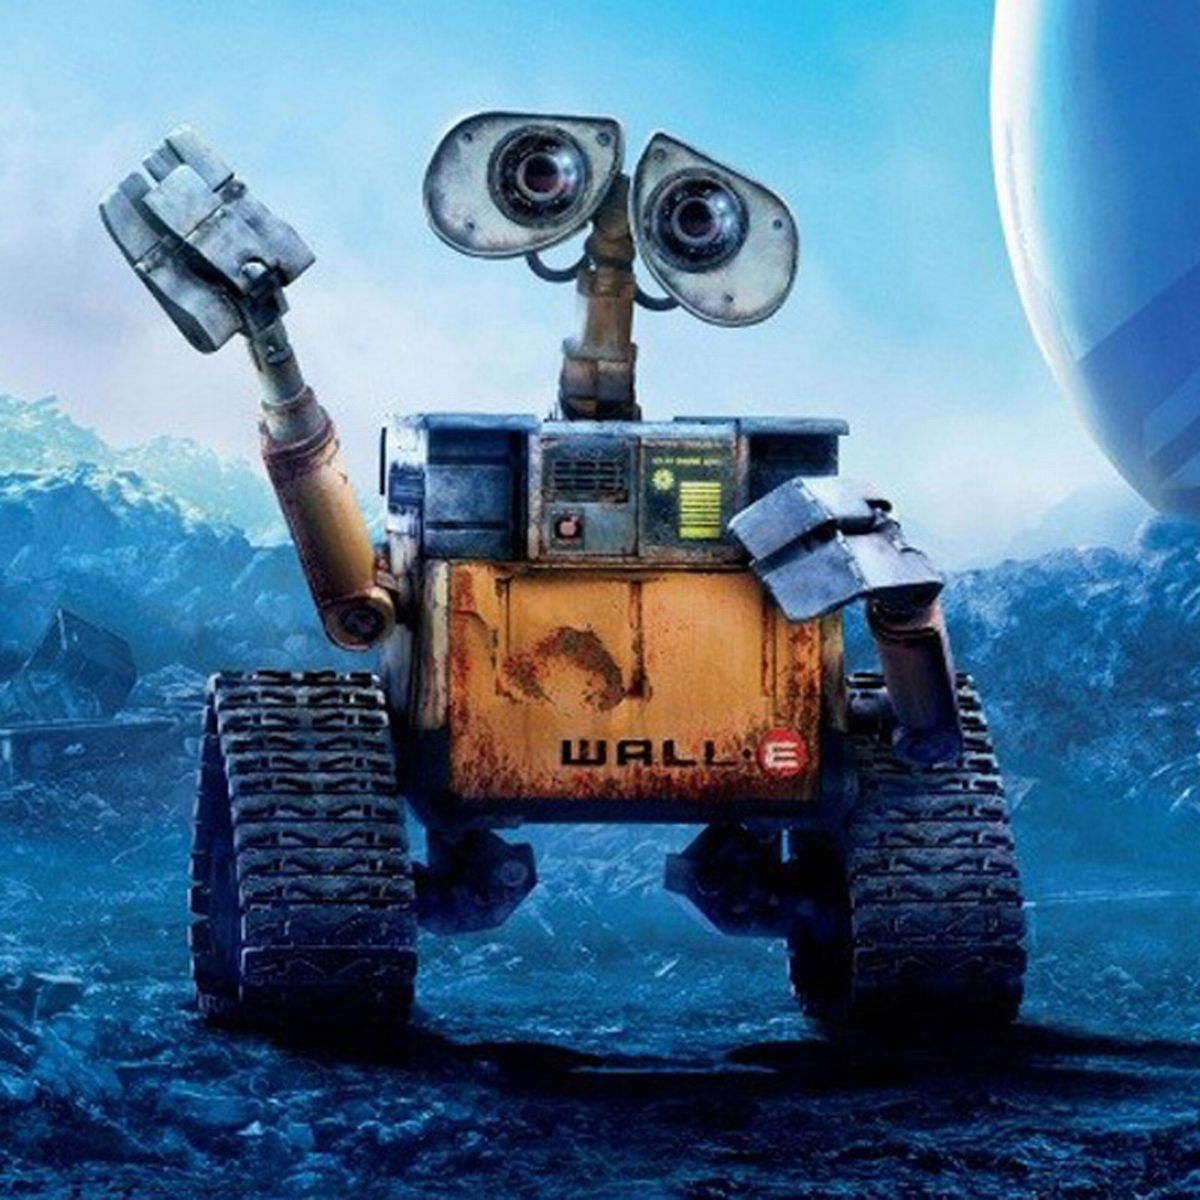 WALL-E: A Robot\\\'s Duty?  25YL Artificial Intelligence in Film